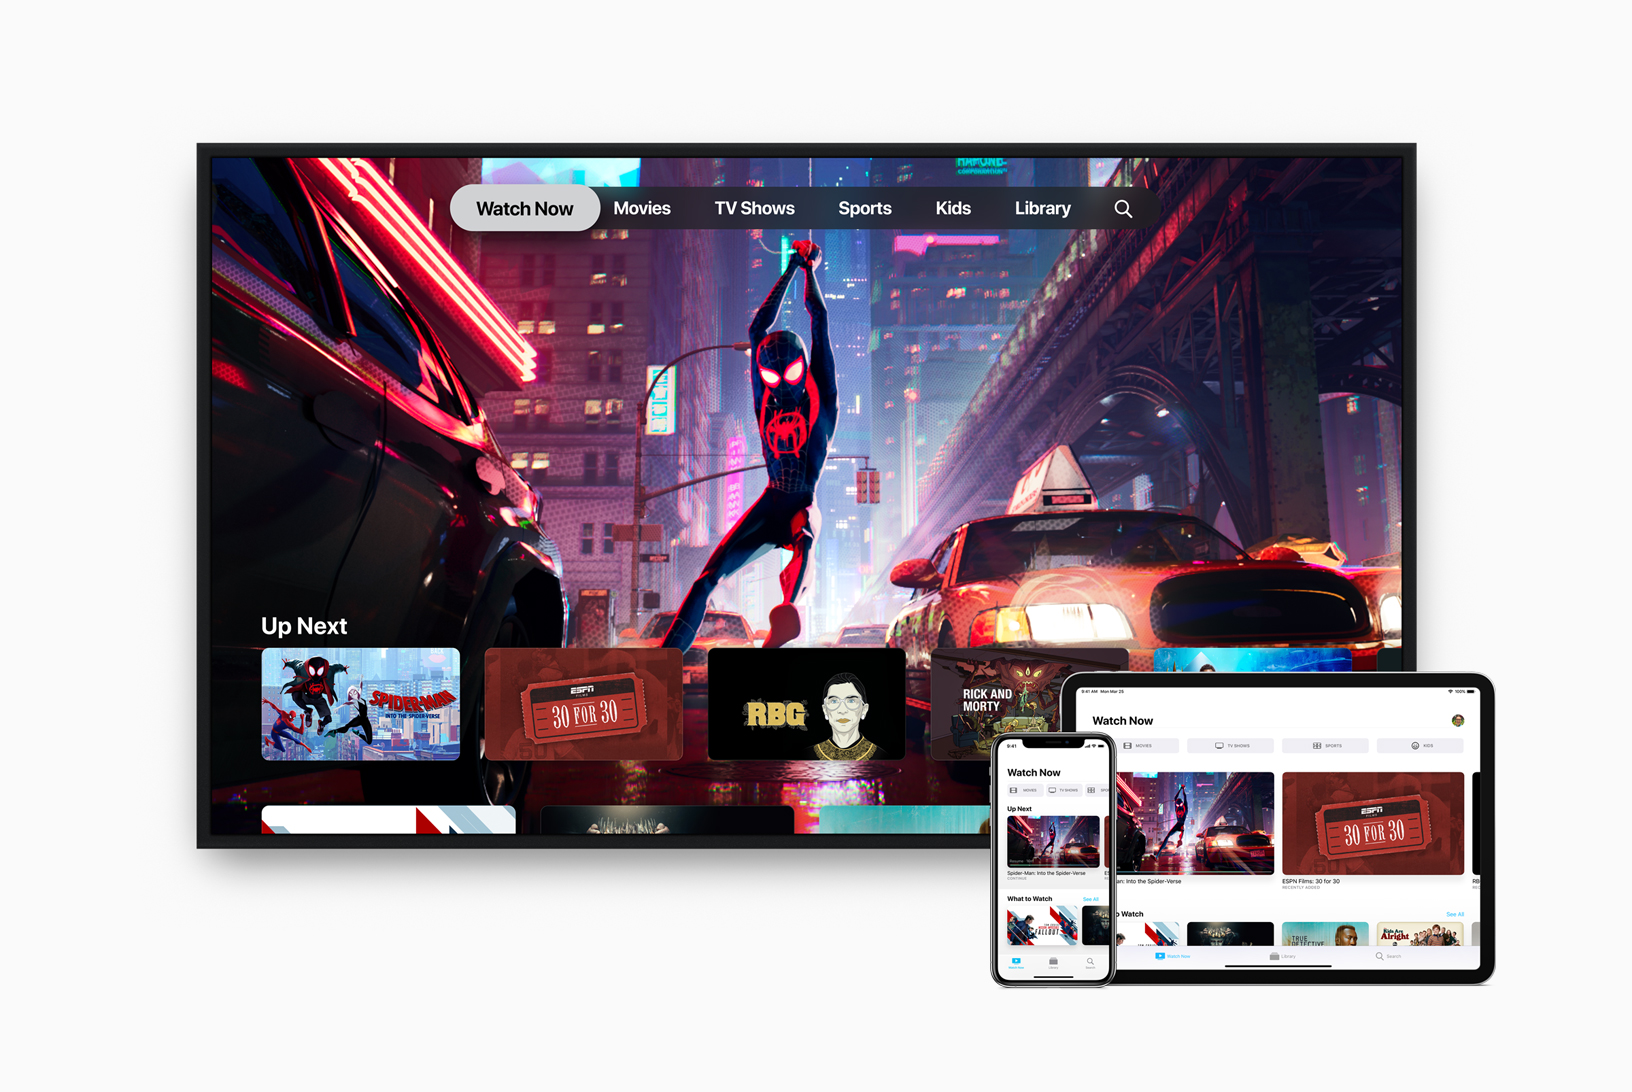 Rumors Suggest Apple TV App Could Be Headed to Xbox, PlayStation Consoles Soon